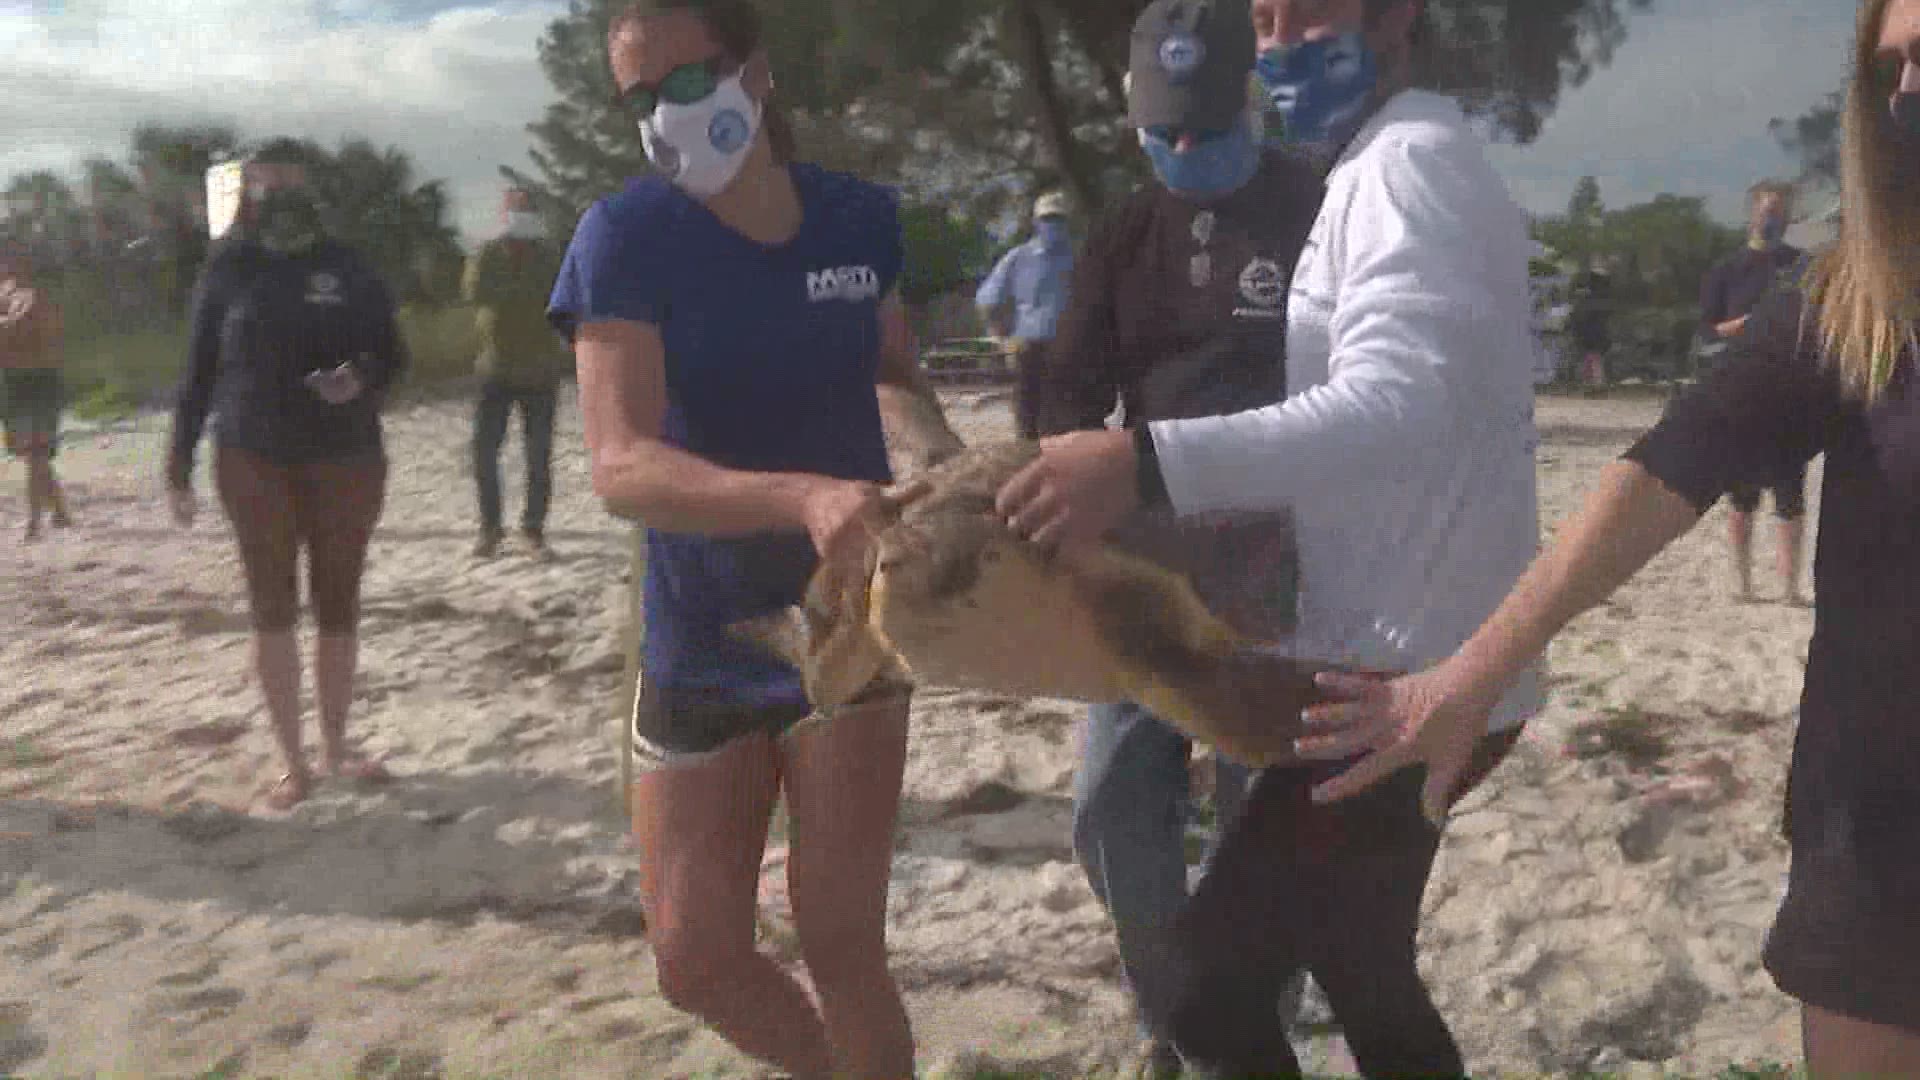 The sea turtle, named "O-H," went back home after a successful recovery at Mote's Sea Turtle Rehabilitation Hospital in Sarasota.